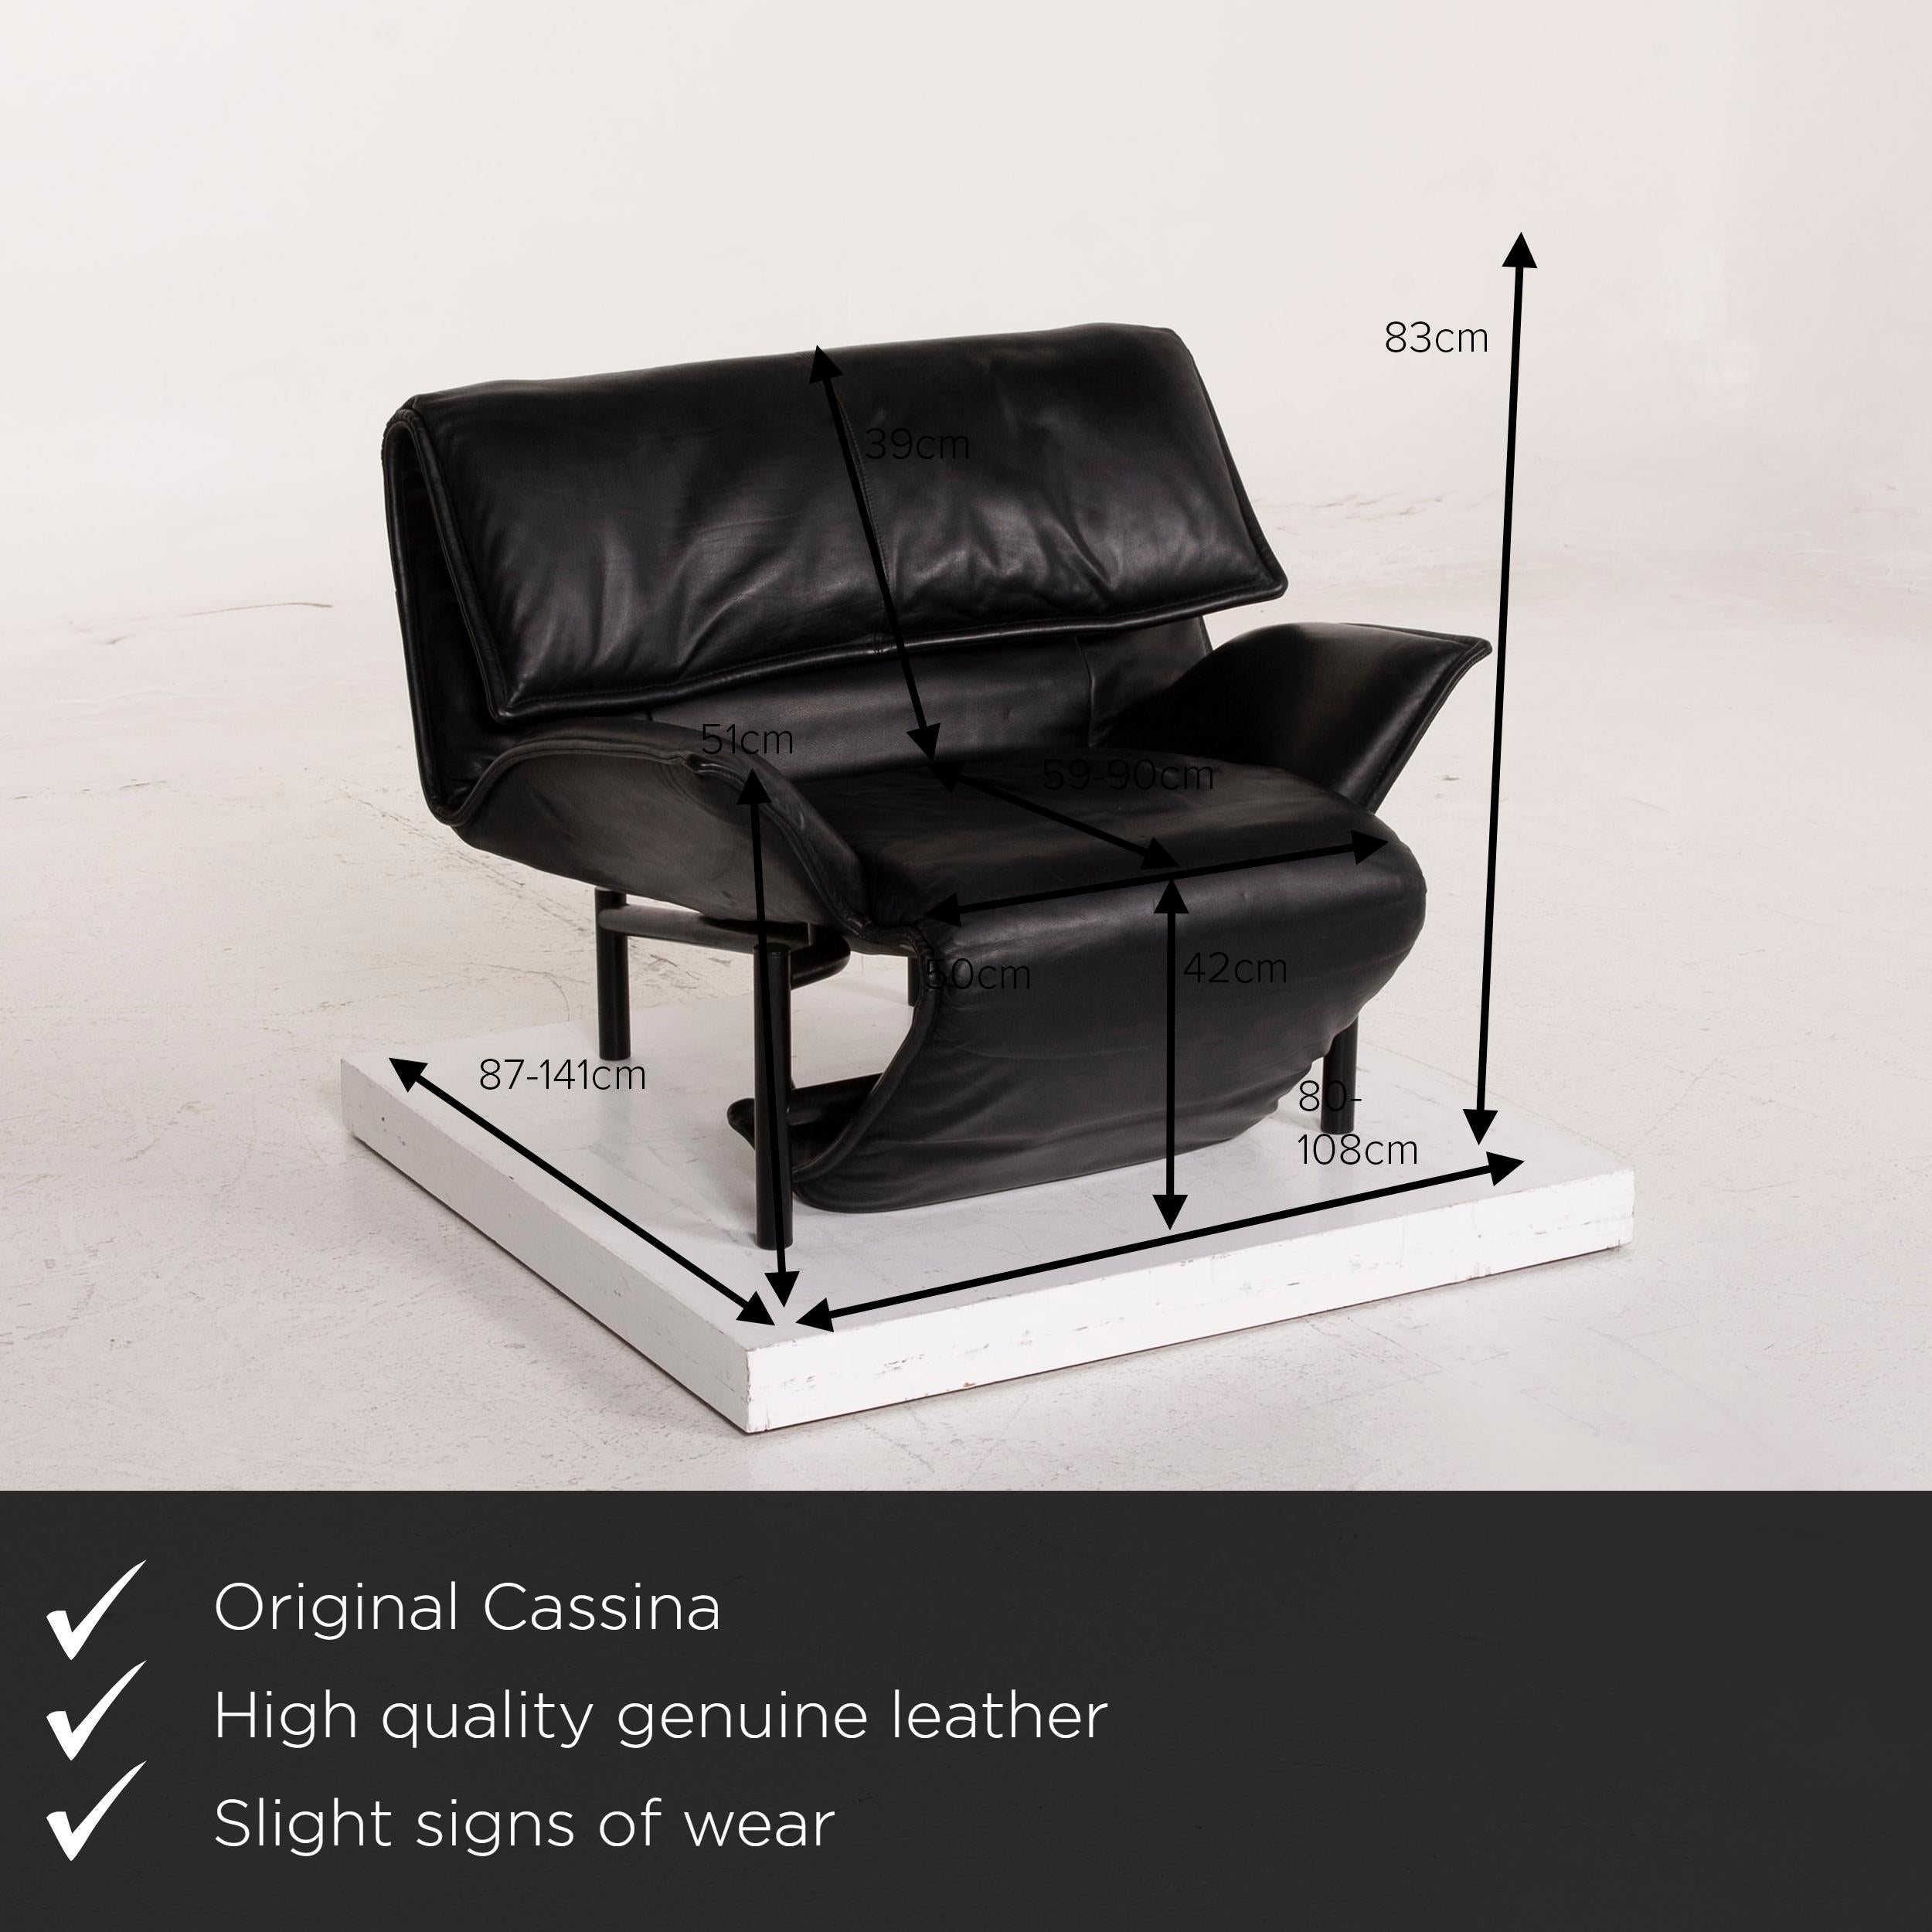 We present to you a Cassina Veranda leather armchair black relax function.
    
 

 Product measurements in centimeters:
 

Depth 87
Width 80
Height 83
Seat height 42
Rest height 51
Seat depth 59
Seat width 50
Back height 39.